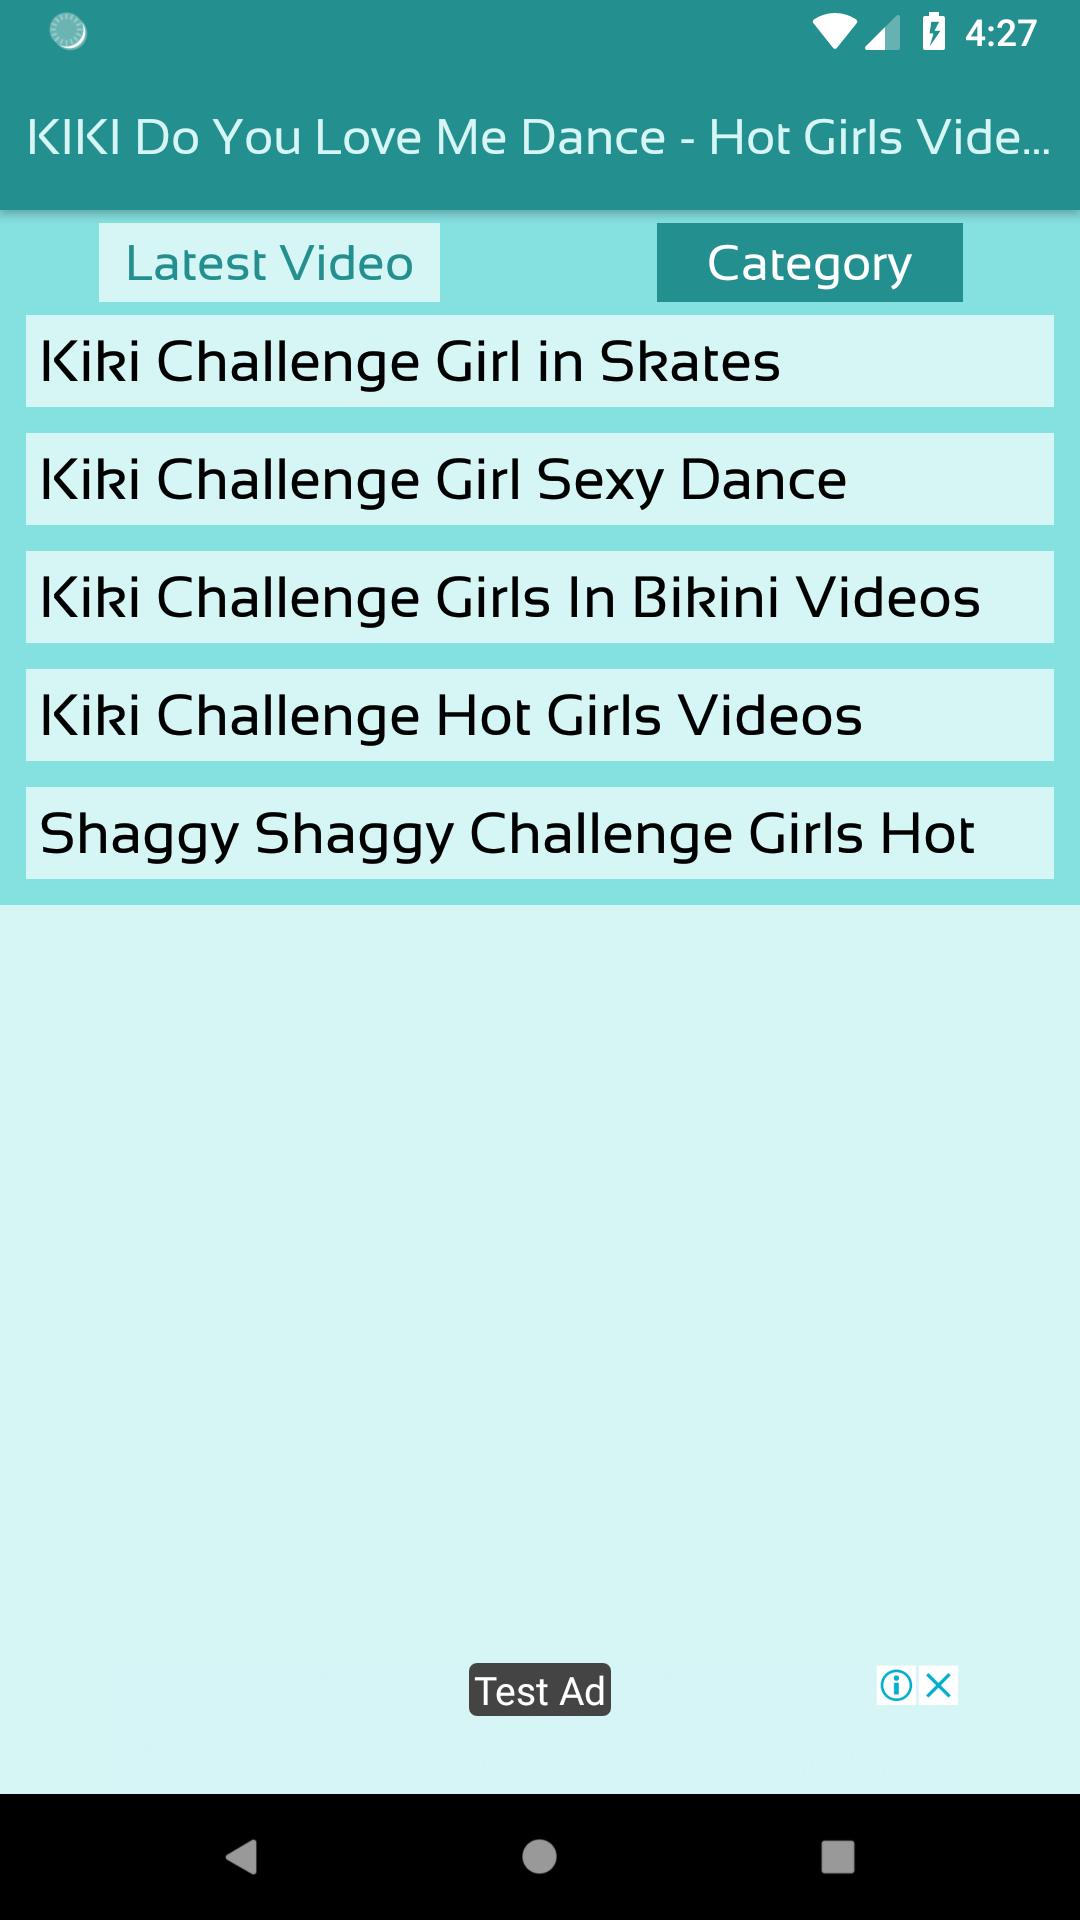 Kiki Do You Love Me Dance Hot Girls Video 2018 For Android Apk